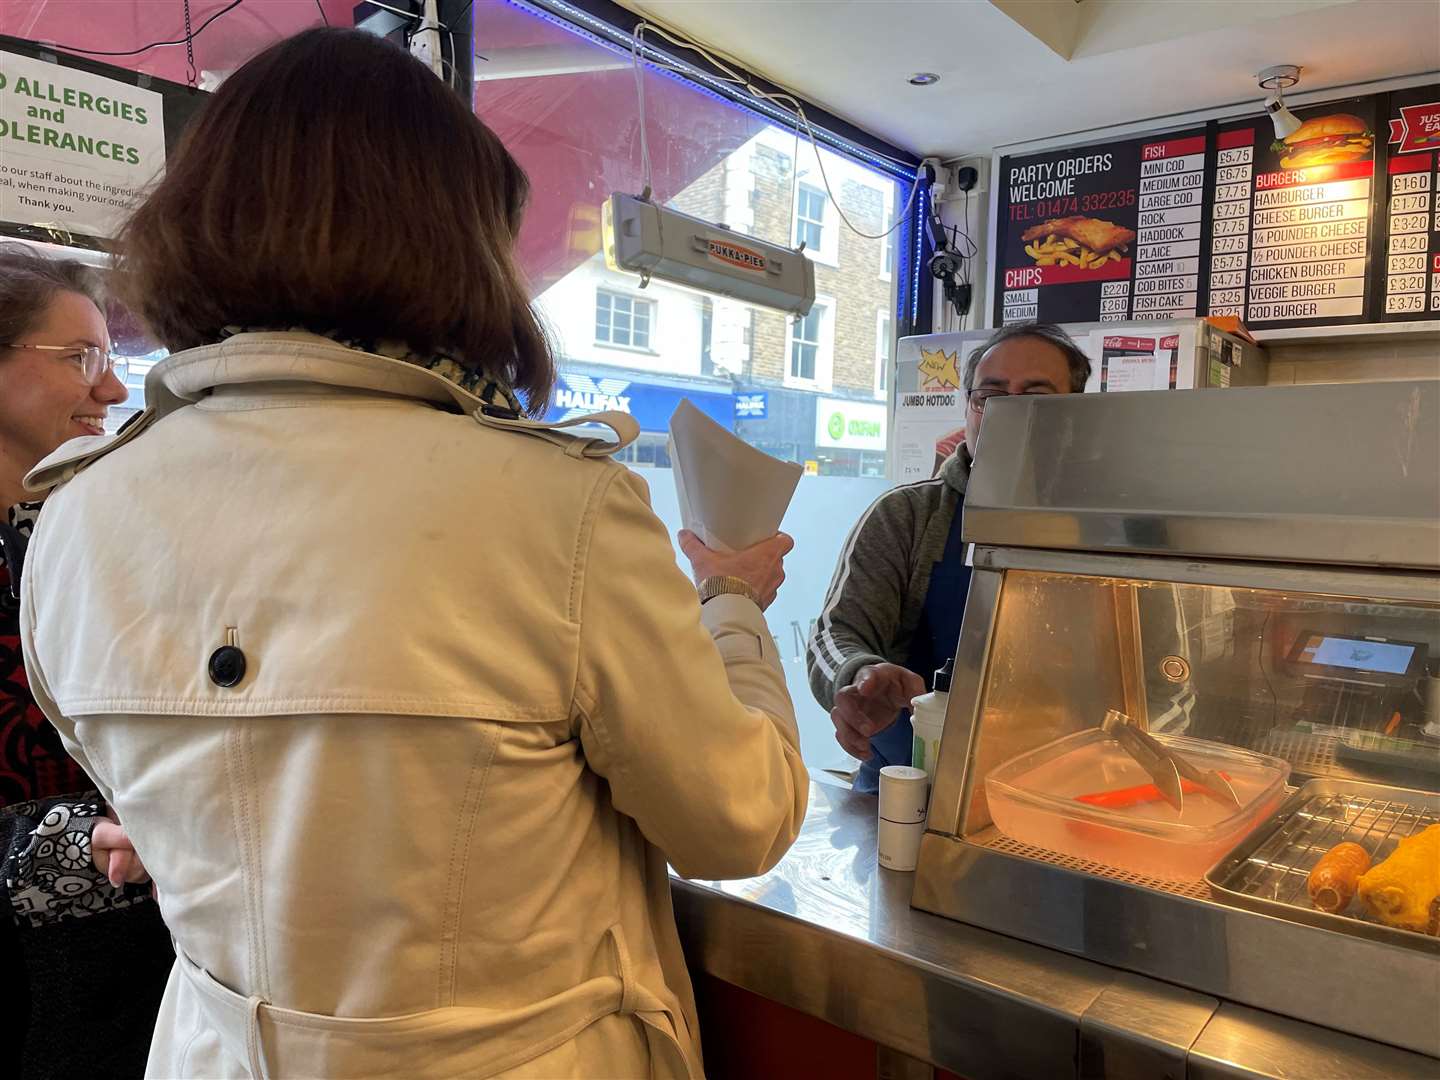 Rachel Reeves visited The Marlin Plaice to get some chips and speak to the owner